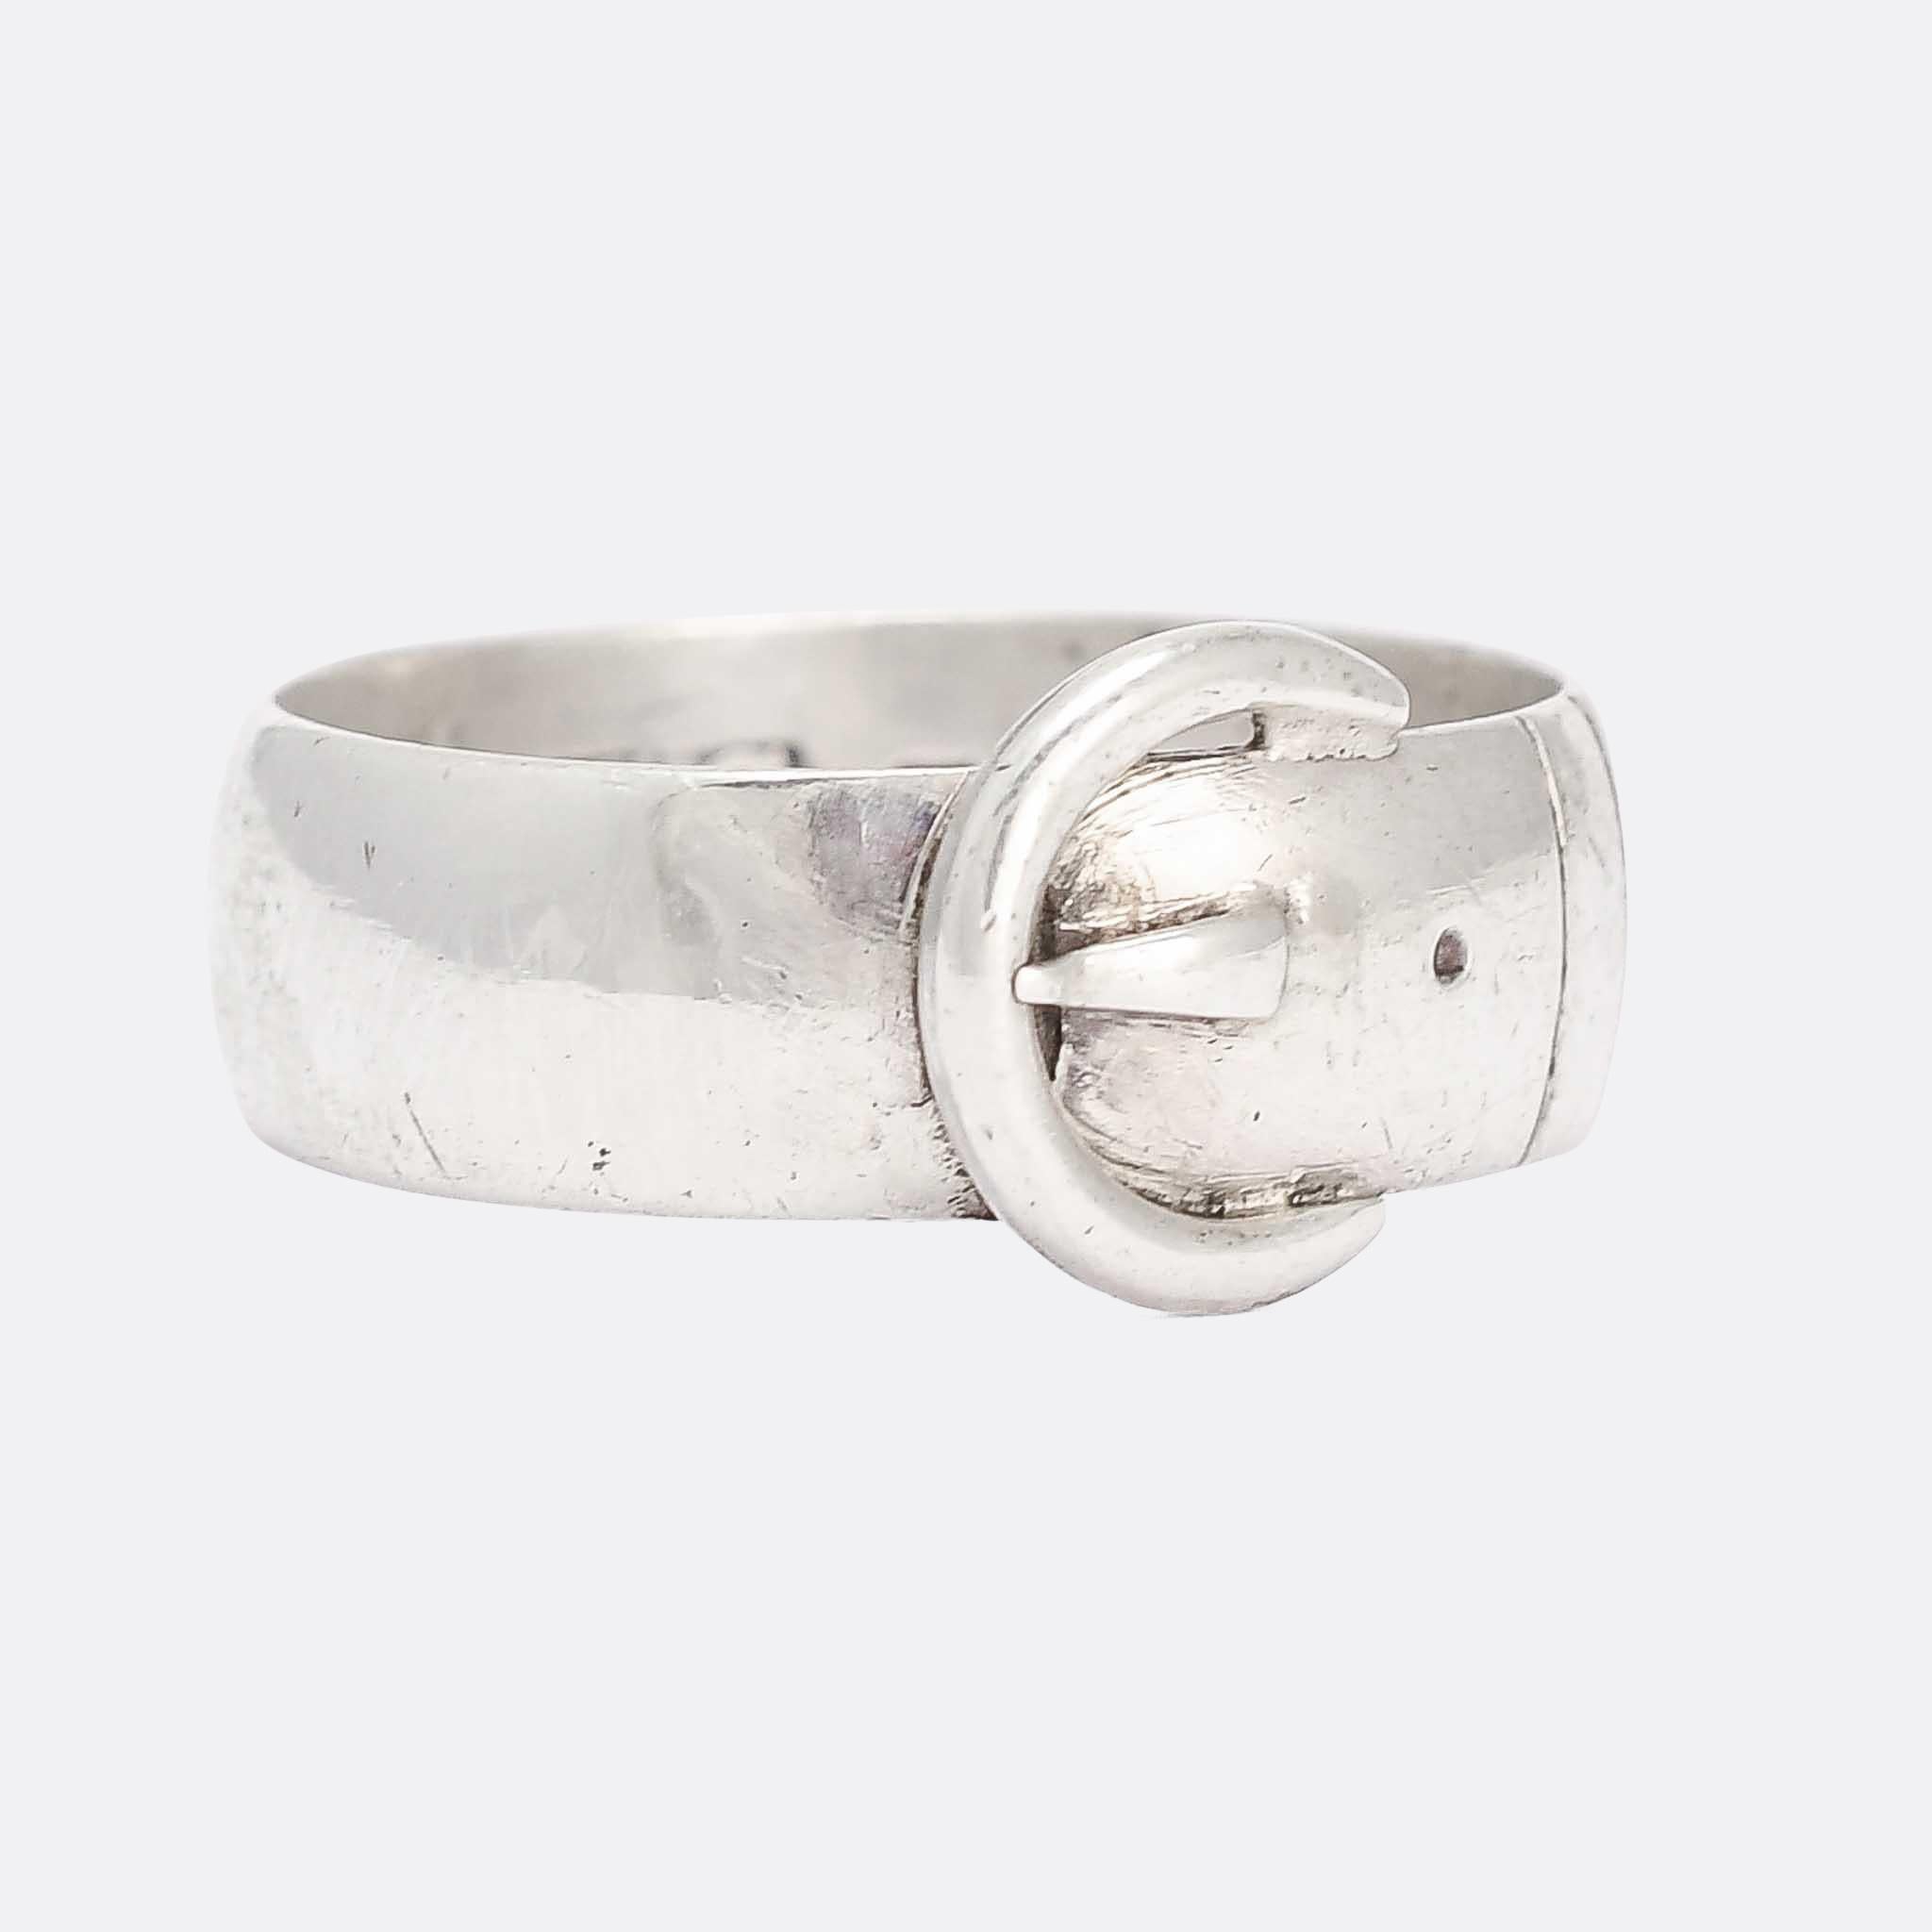 A gorgeous antique buckle ring in sterling silver. It dates from the year 1904, with clear English hallmarks and maker's mark AGG for Alfred George Griffiths of Hylton Street, Birmingham. It's a lovely quality, handmade piece that remains in great